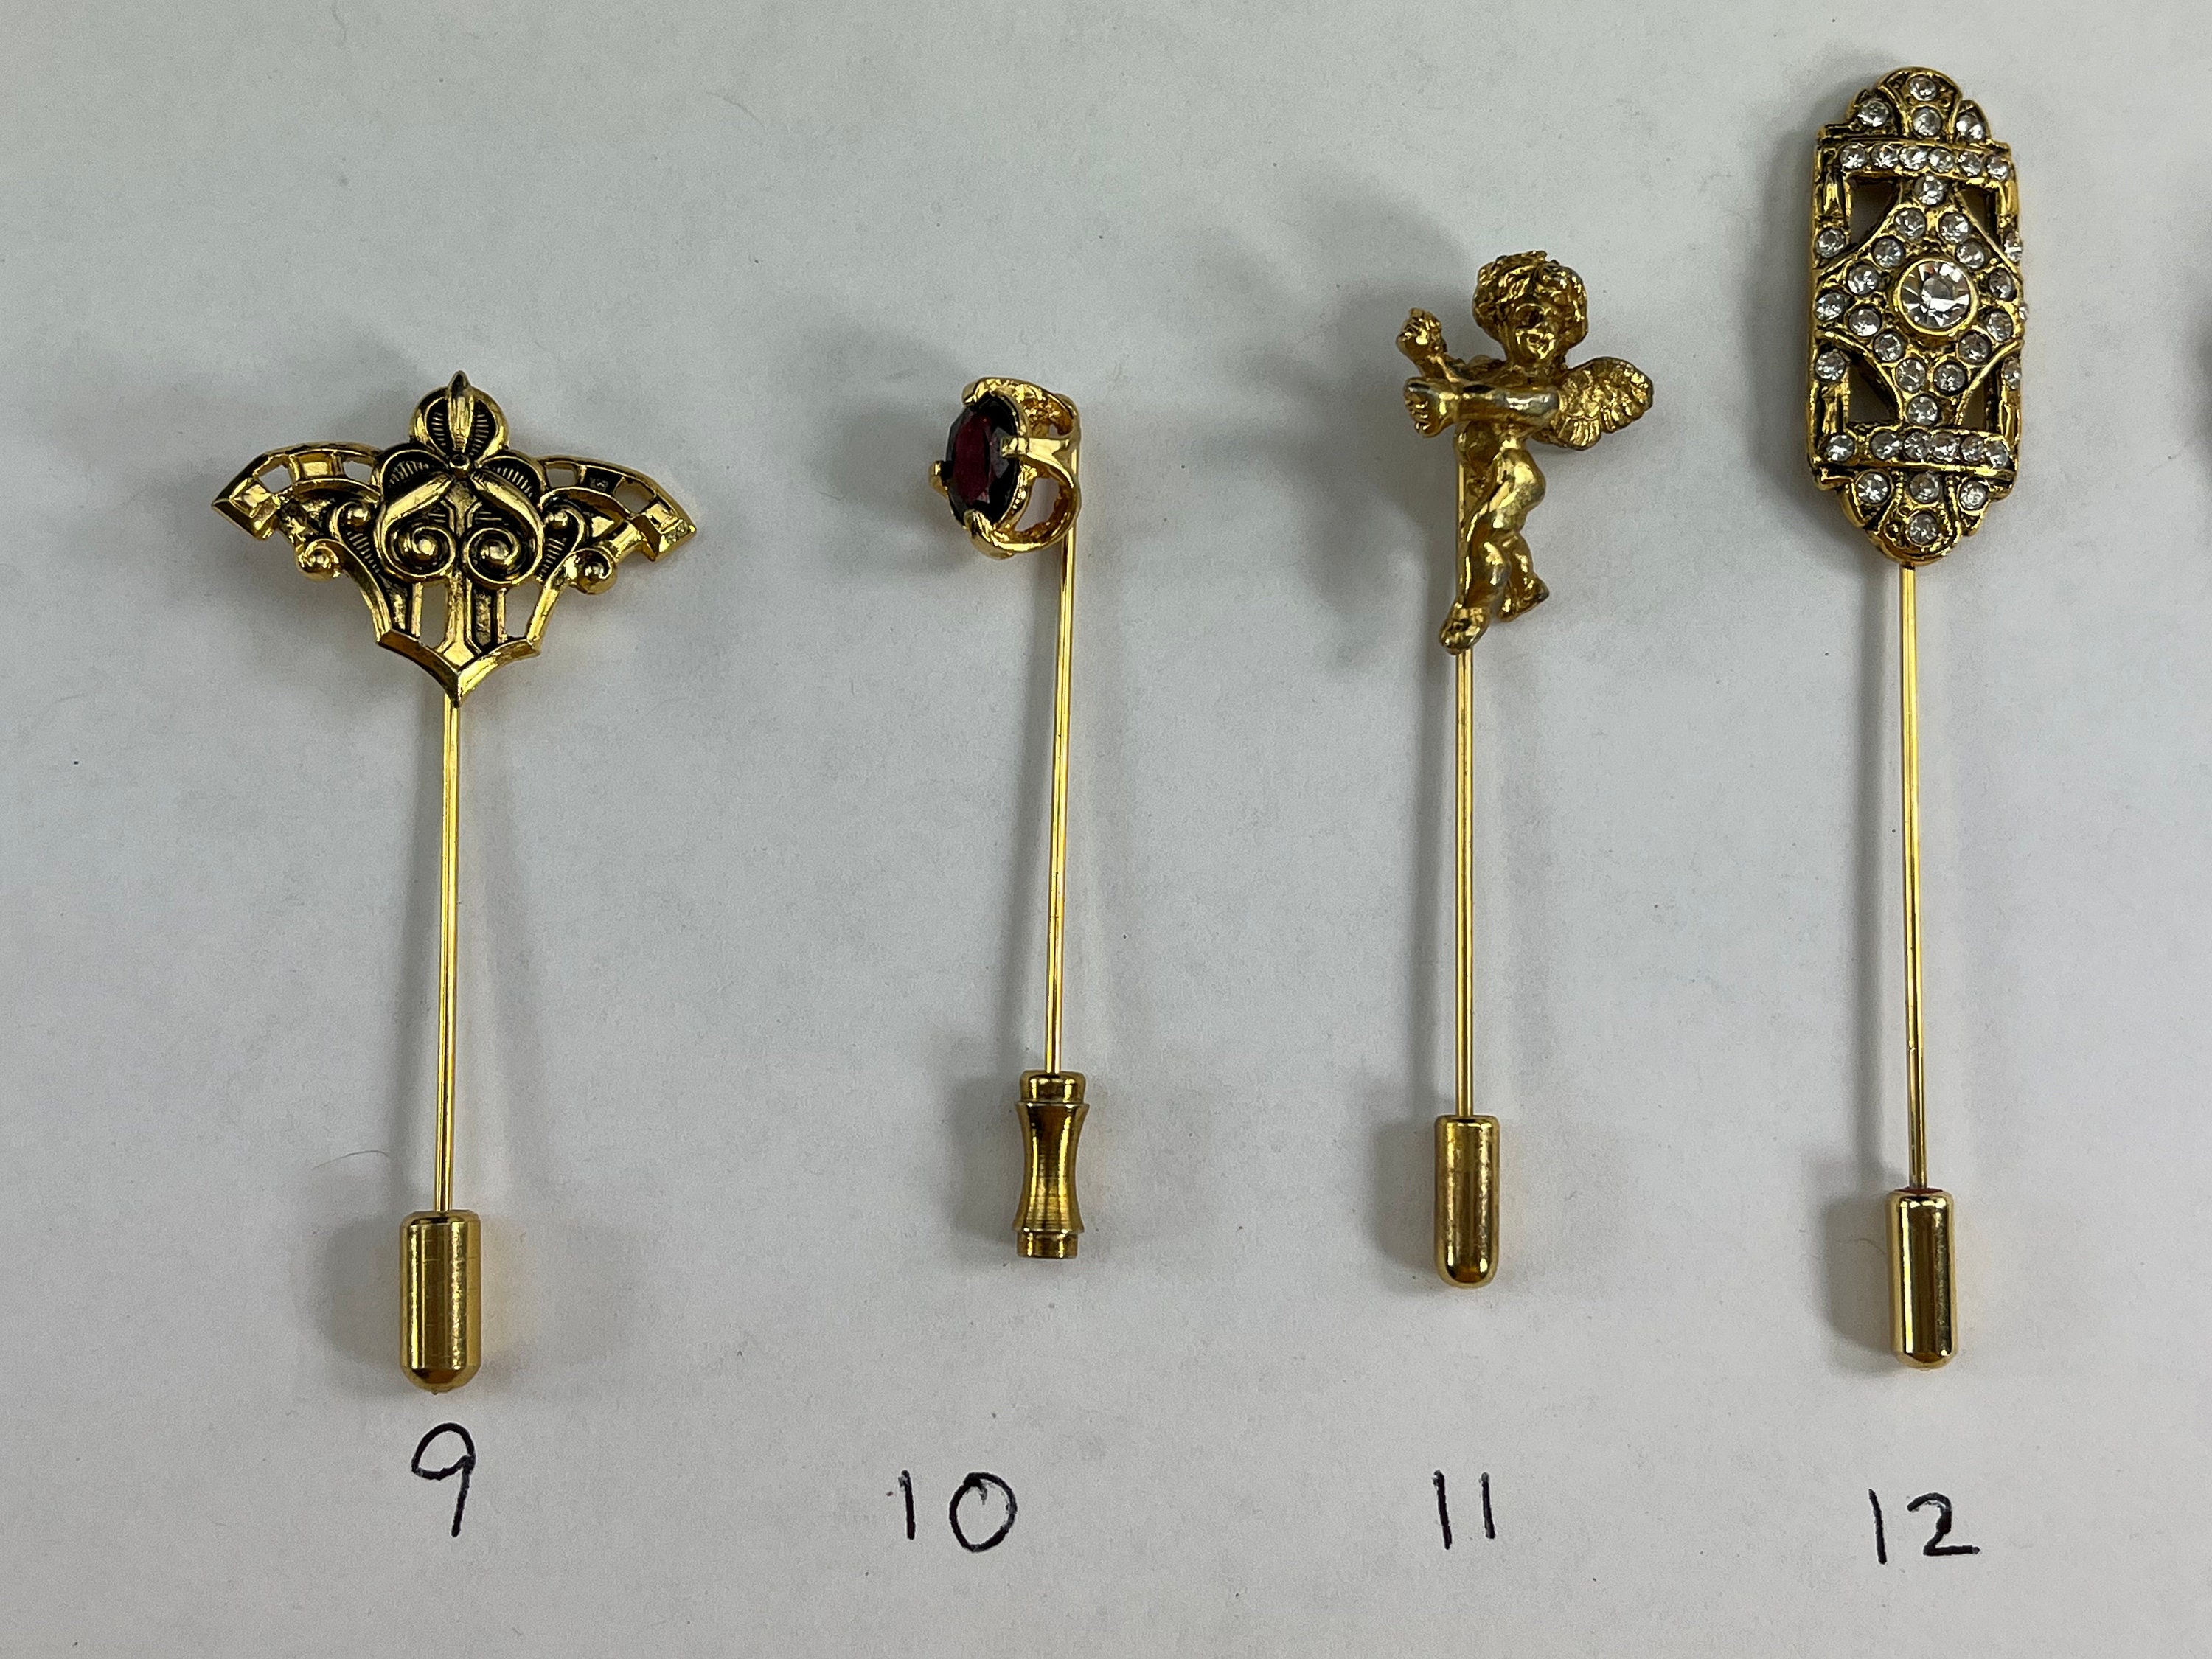 VINTAGE Pin featuring a variety of collectible Stick Pins